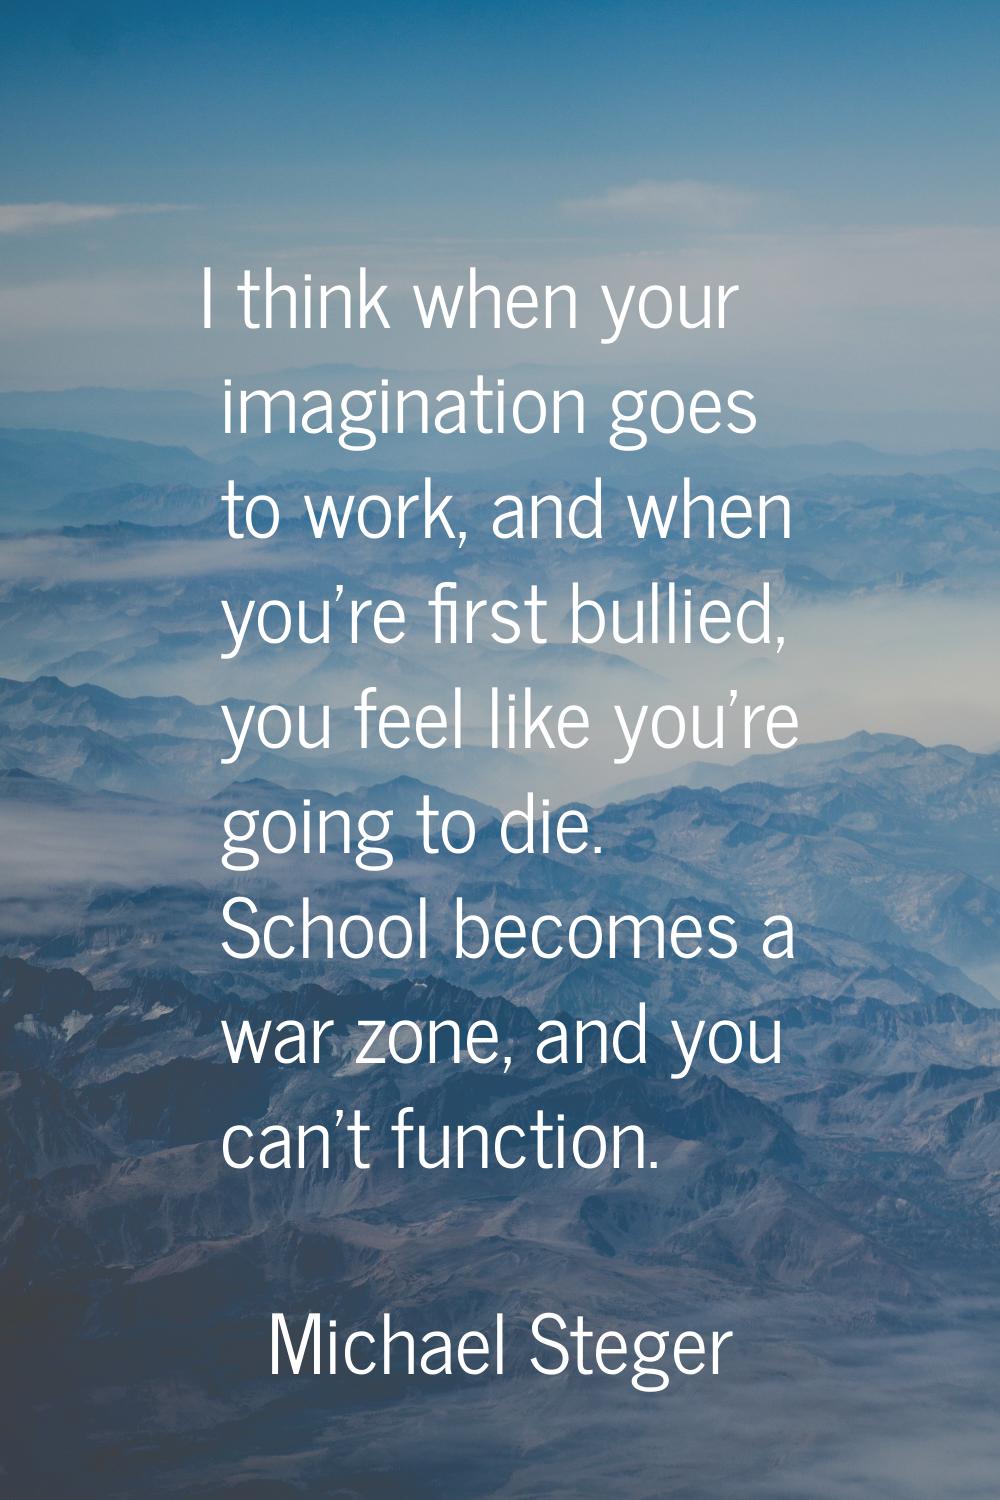 I think when your imagination goes to work, and when you're first bullied, you feel like you're goi